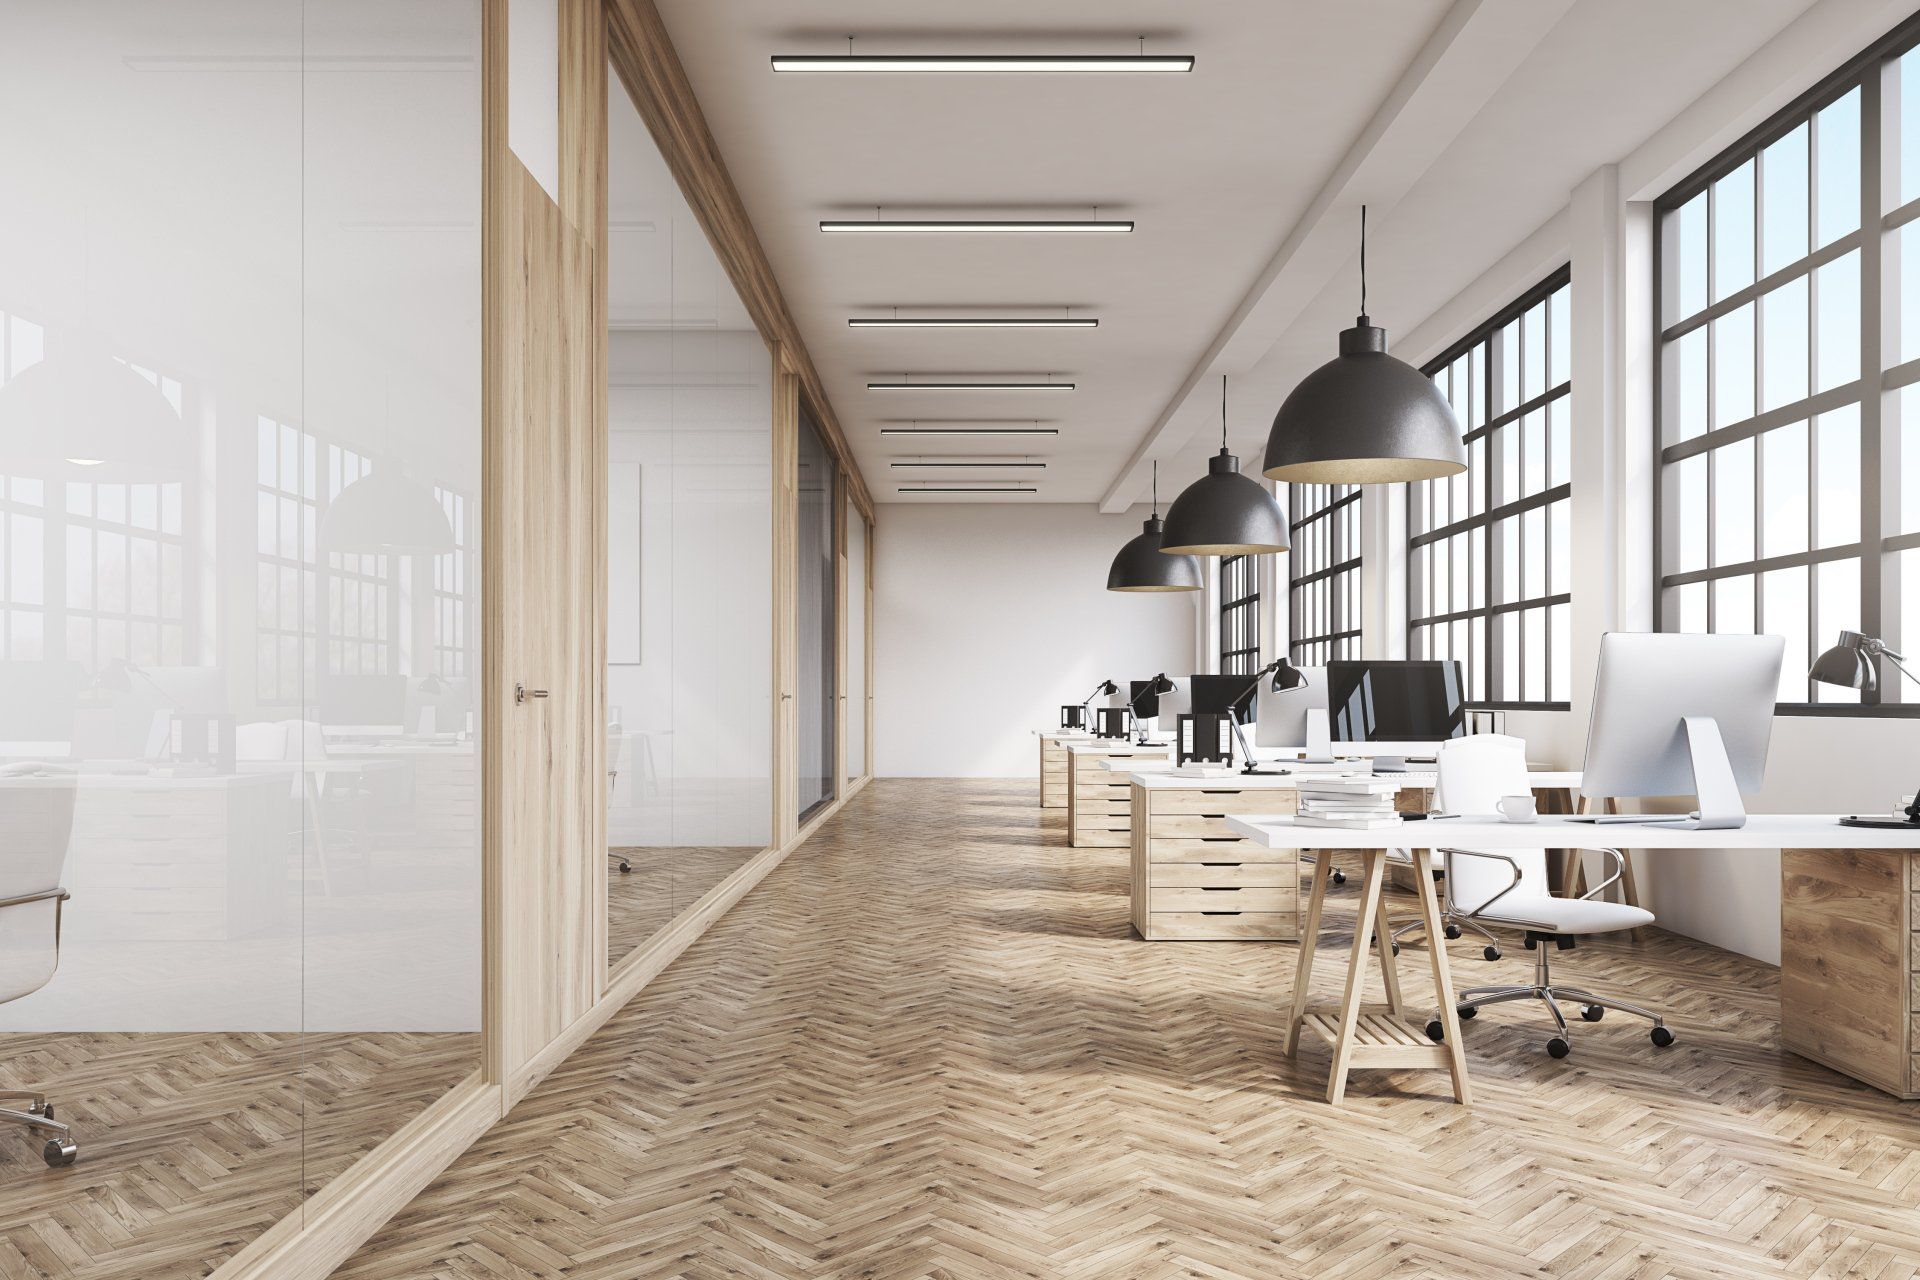 ffice interior with a row of dark wood tables standing under large windows.